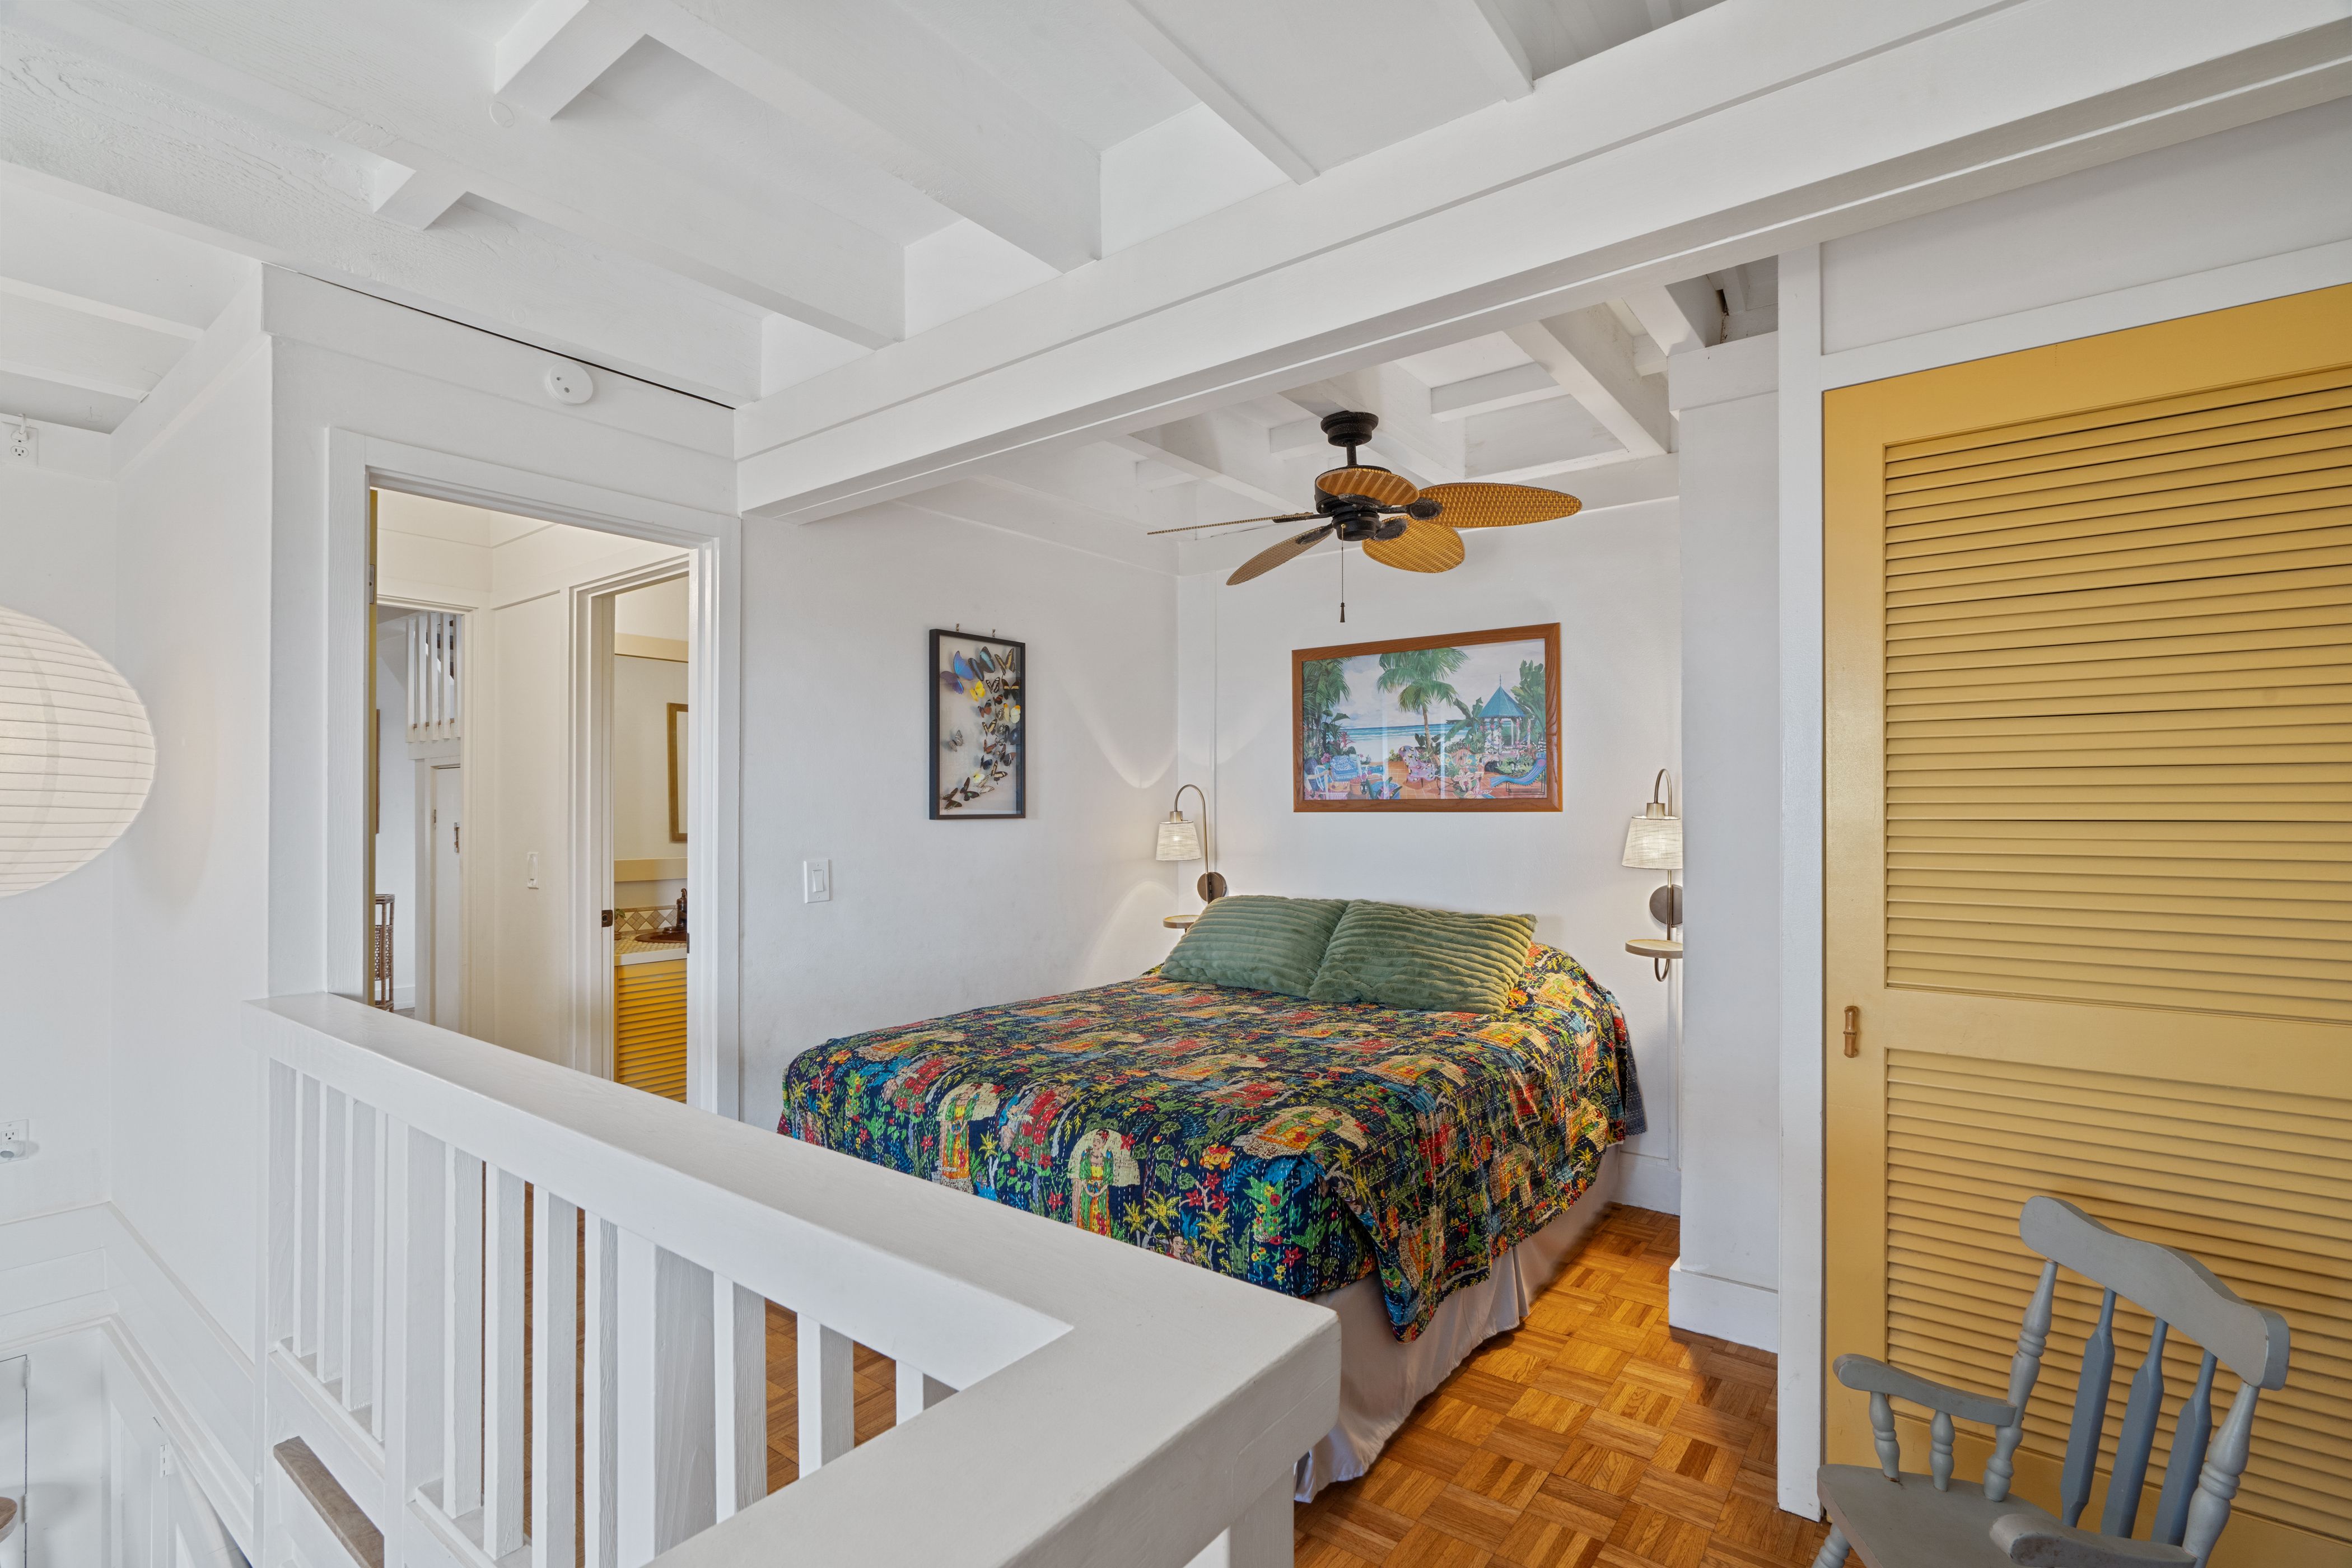 Amazing Views Hale queen bed in main level double-bedroom bonus den. Can be closed from the main house to convert to private suite. Opens directly to the pool and hot tub lanai.